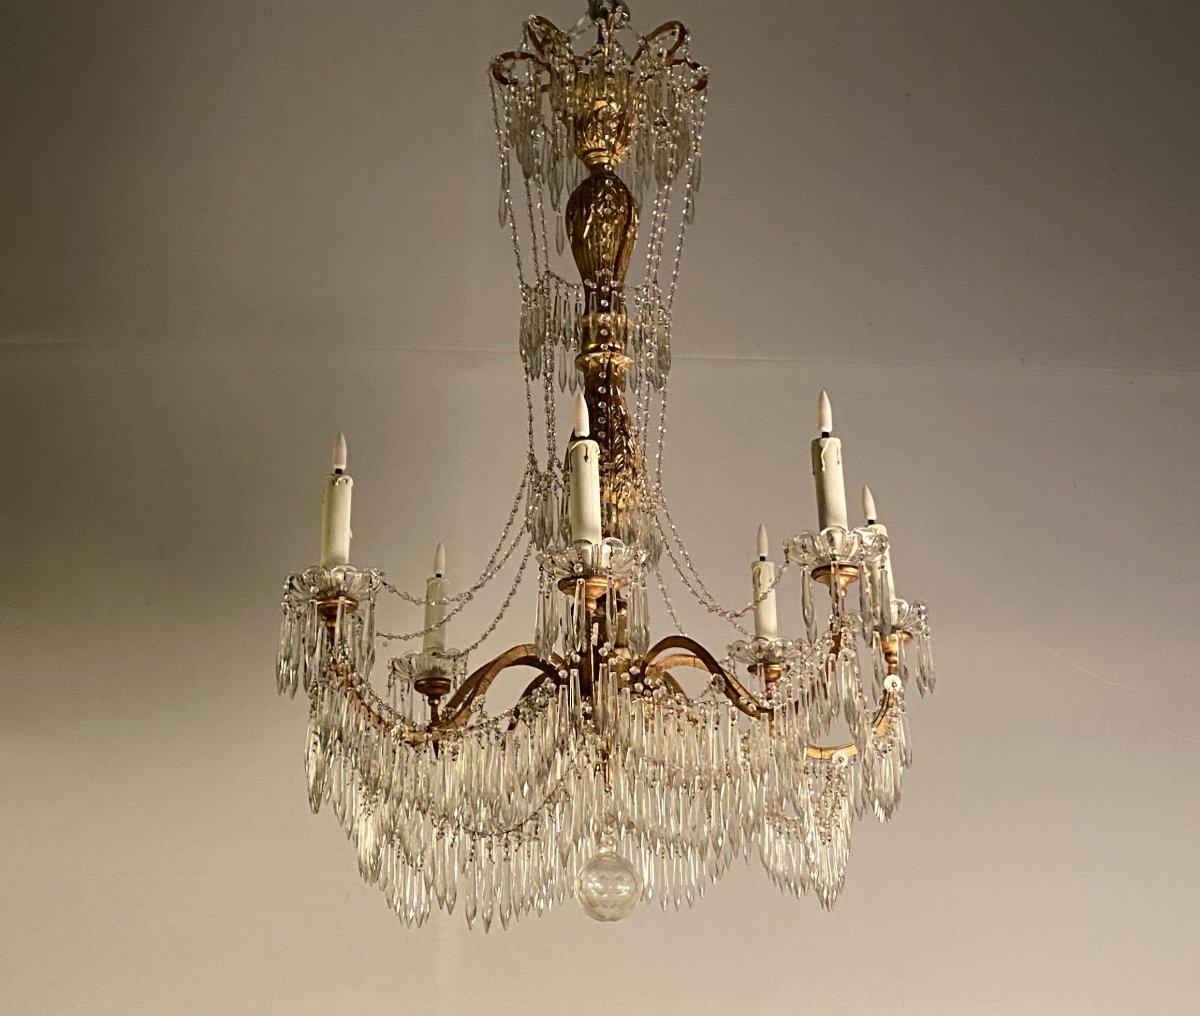 French Chandelier 8 Arms of Light, Tassels and Golden Wood, Italy, Early 20th Century